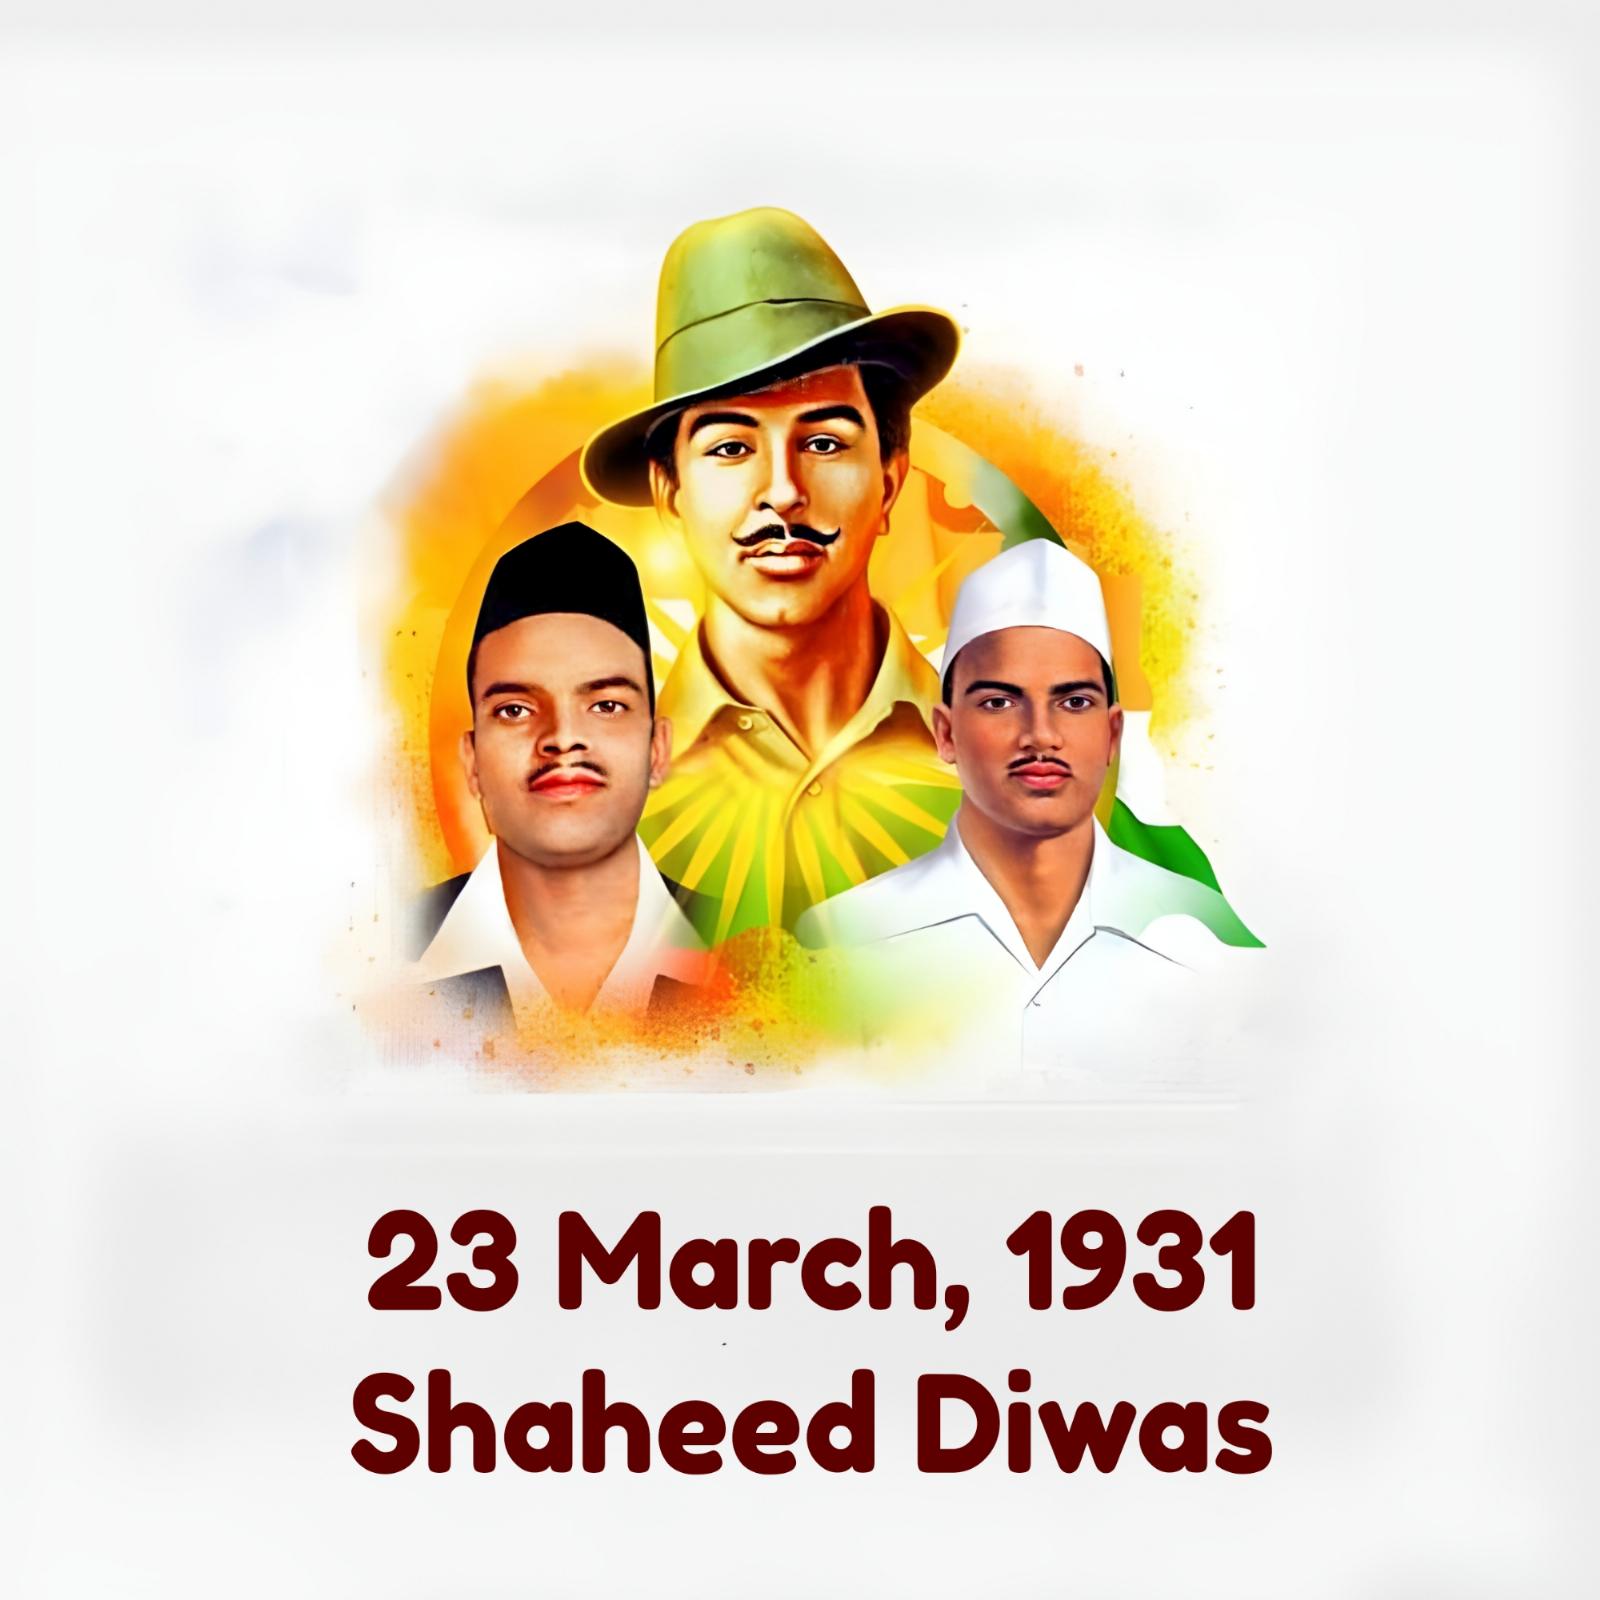 23 March Shaheed Diwas Image